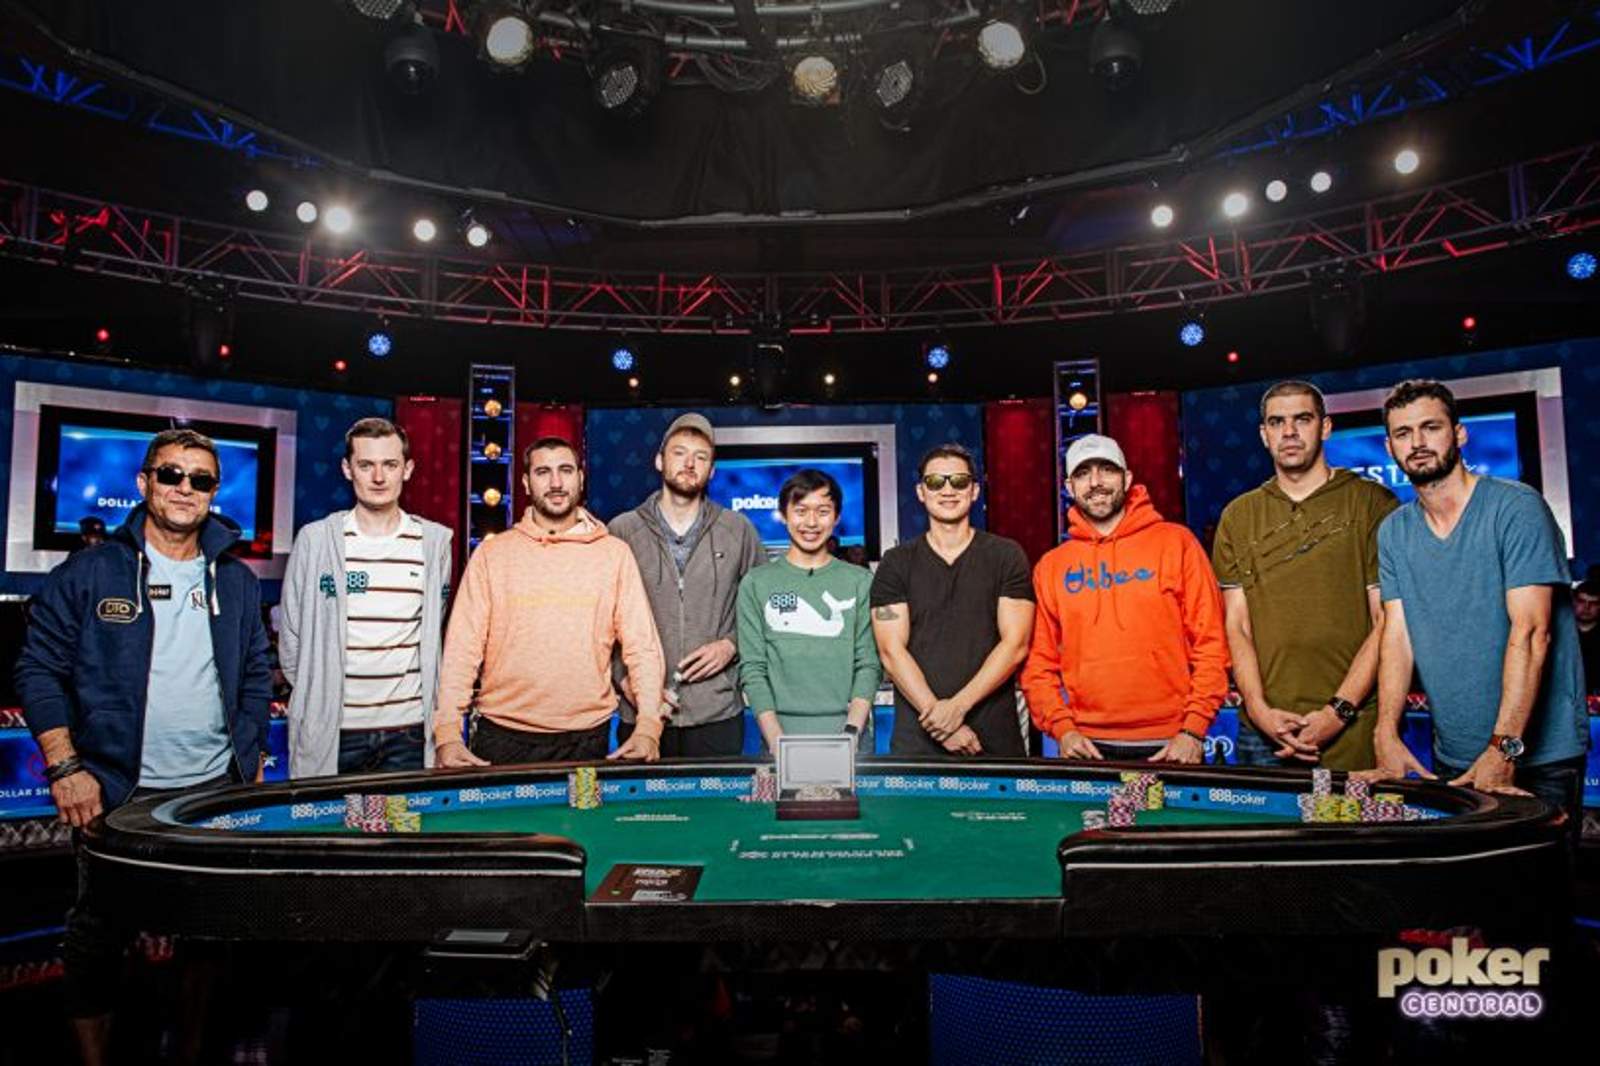 Watch The 2019 World Series of Poker Main Event Final Table on PokerGO